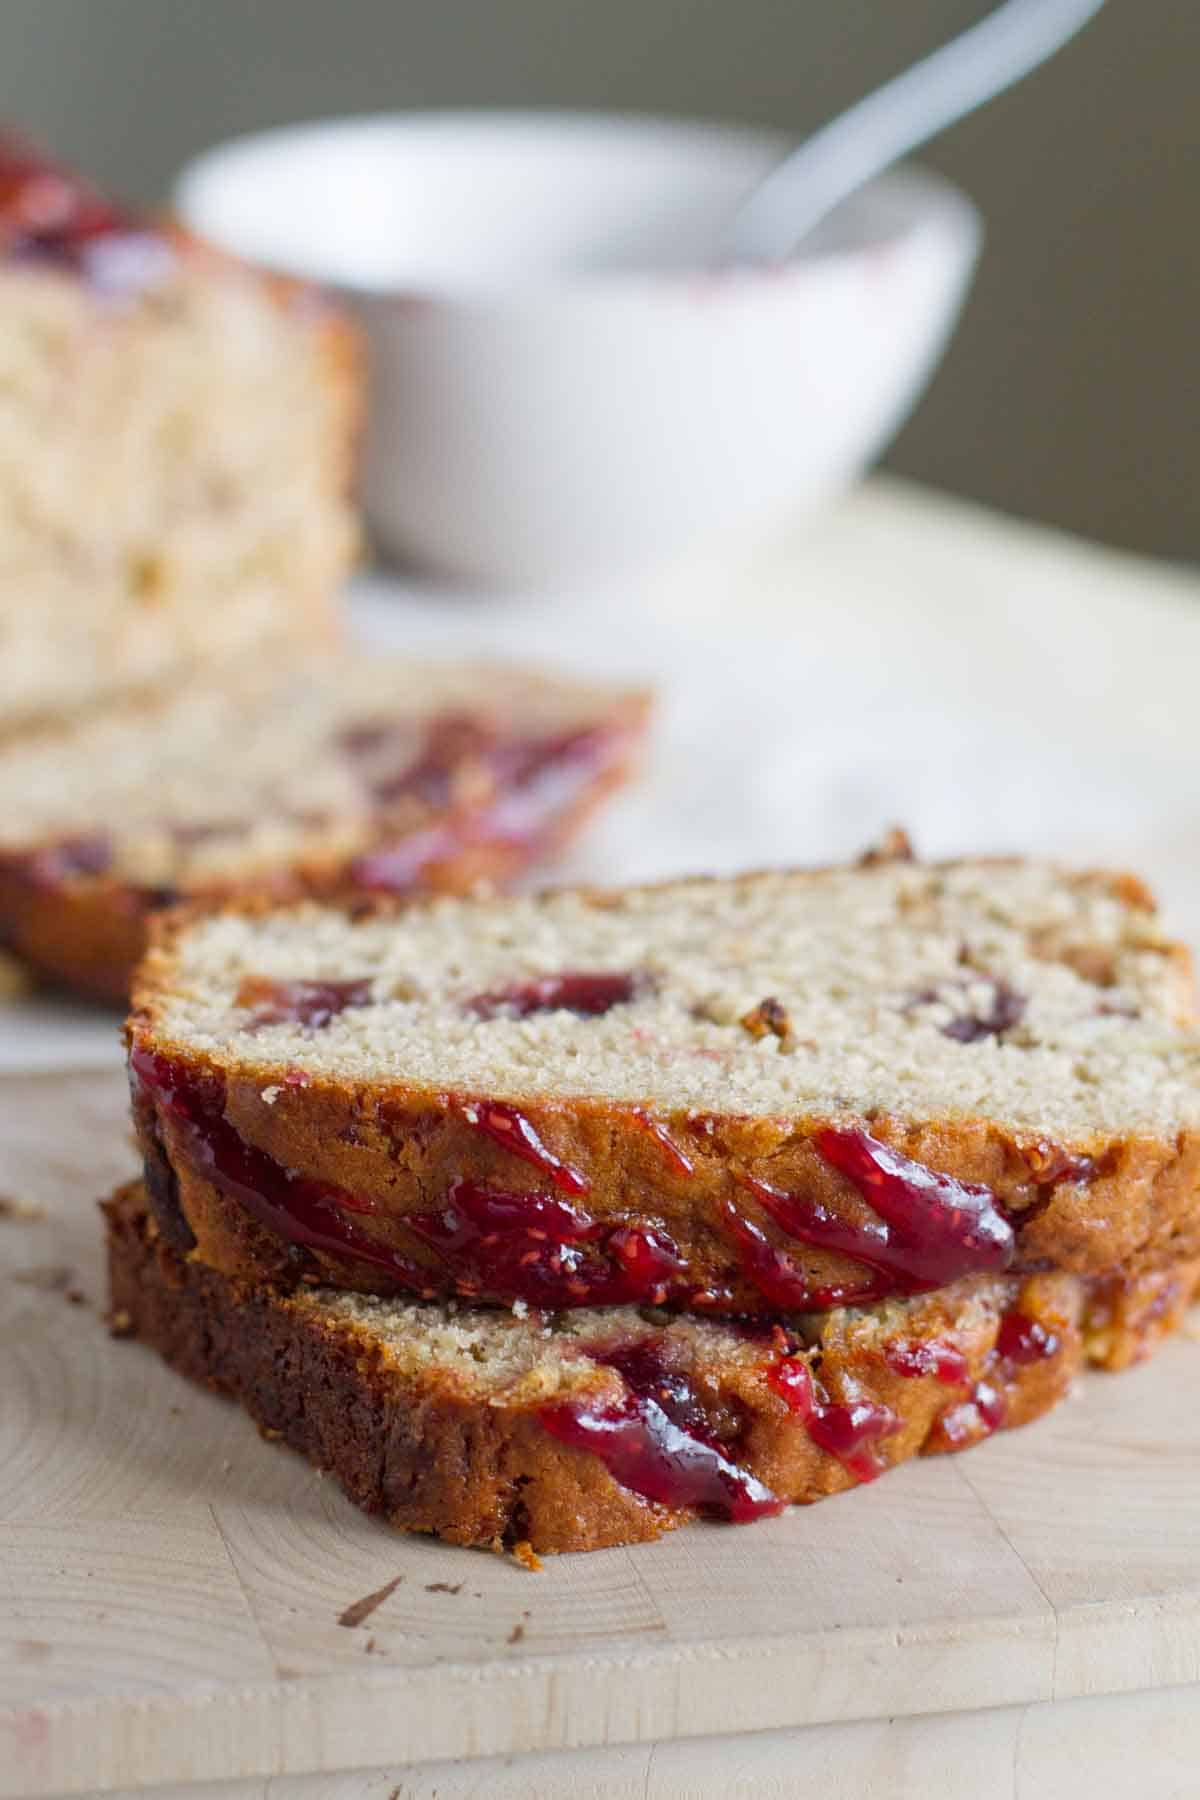 Two slices of Peanut Butter and Jelly Banana Bread on a wooden board.